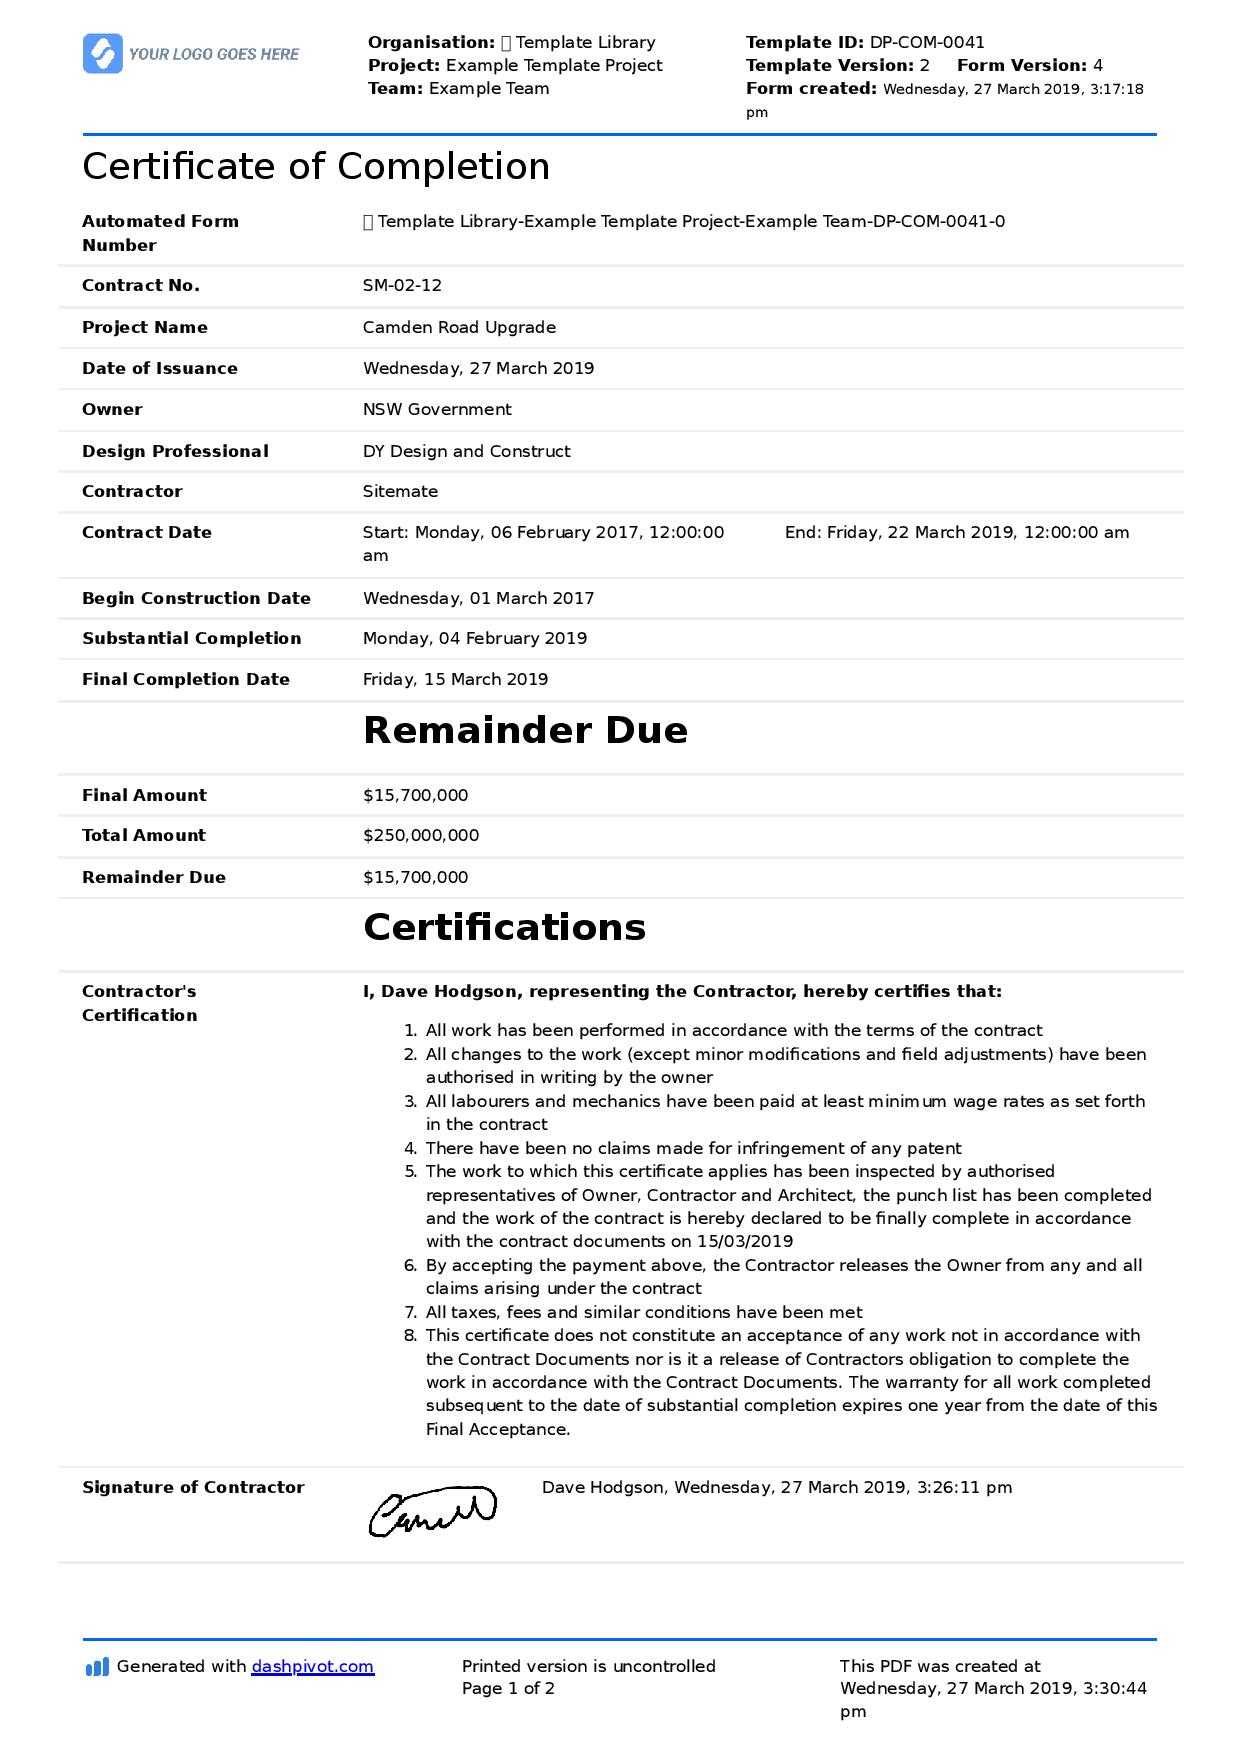 Certificate Of Completion For Construction (Free Template + Pertaining To Certificate Of Completion Template Construction